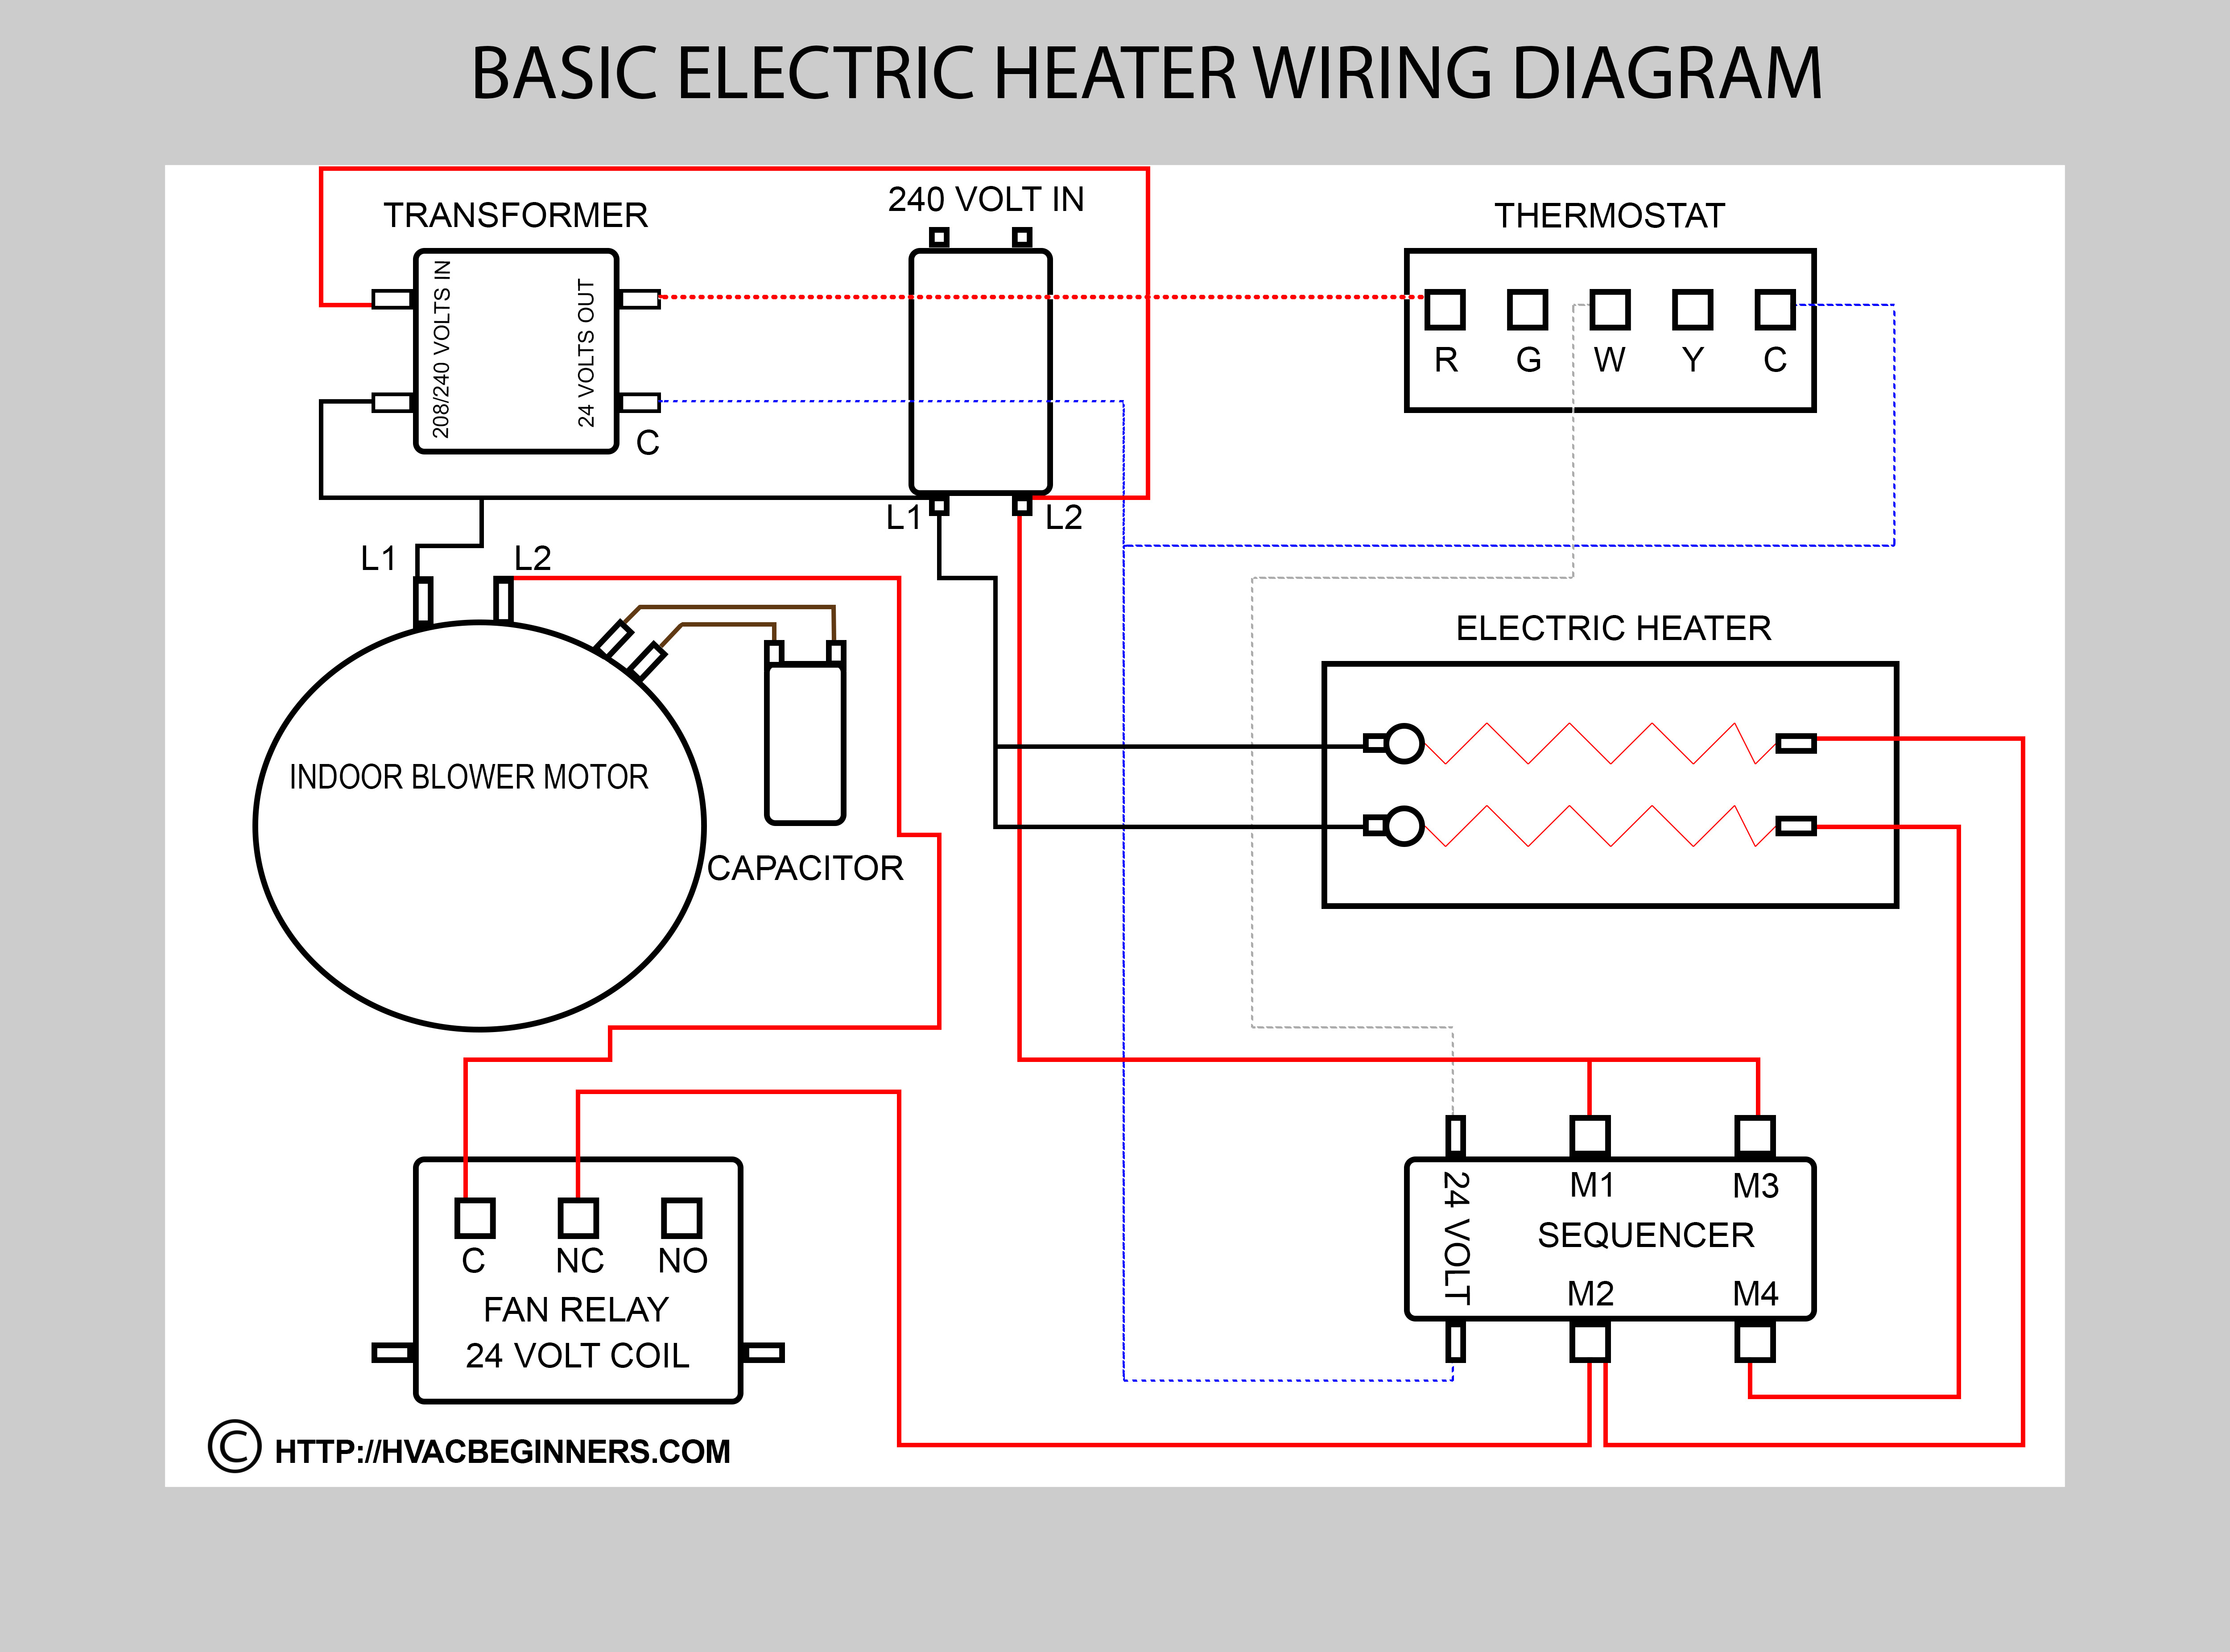 Truck In Air Conditioning Wiring Diagram | Schematic Diagram - Air Handler Wiring Diagram